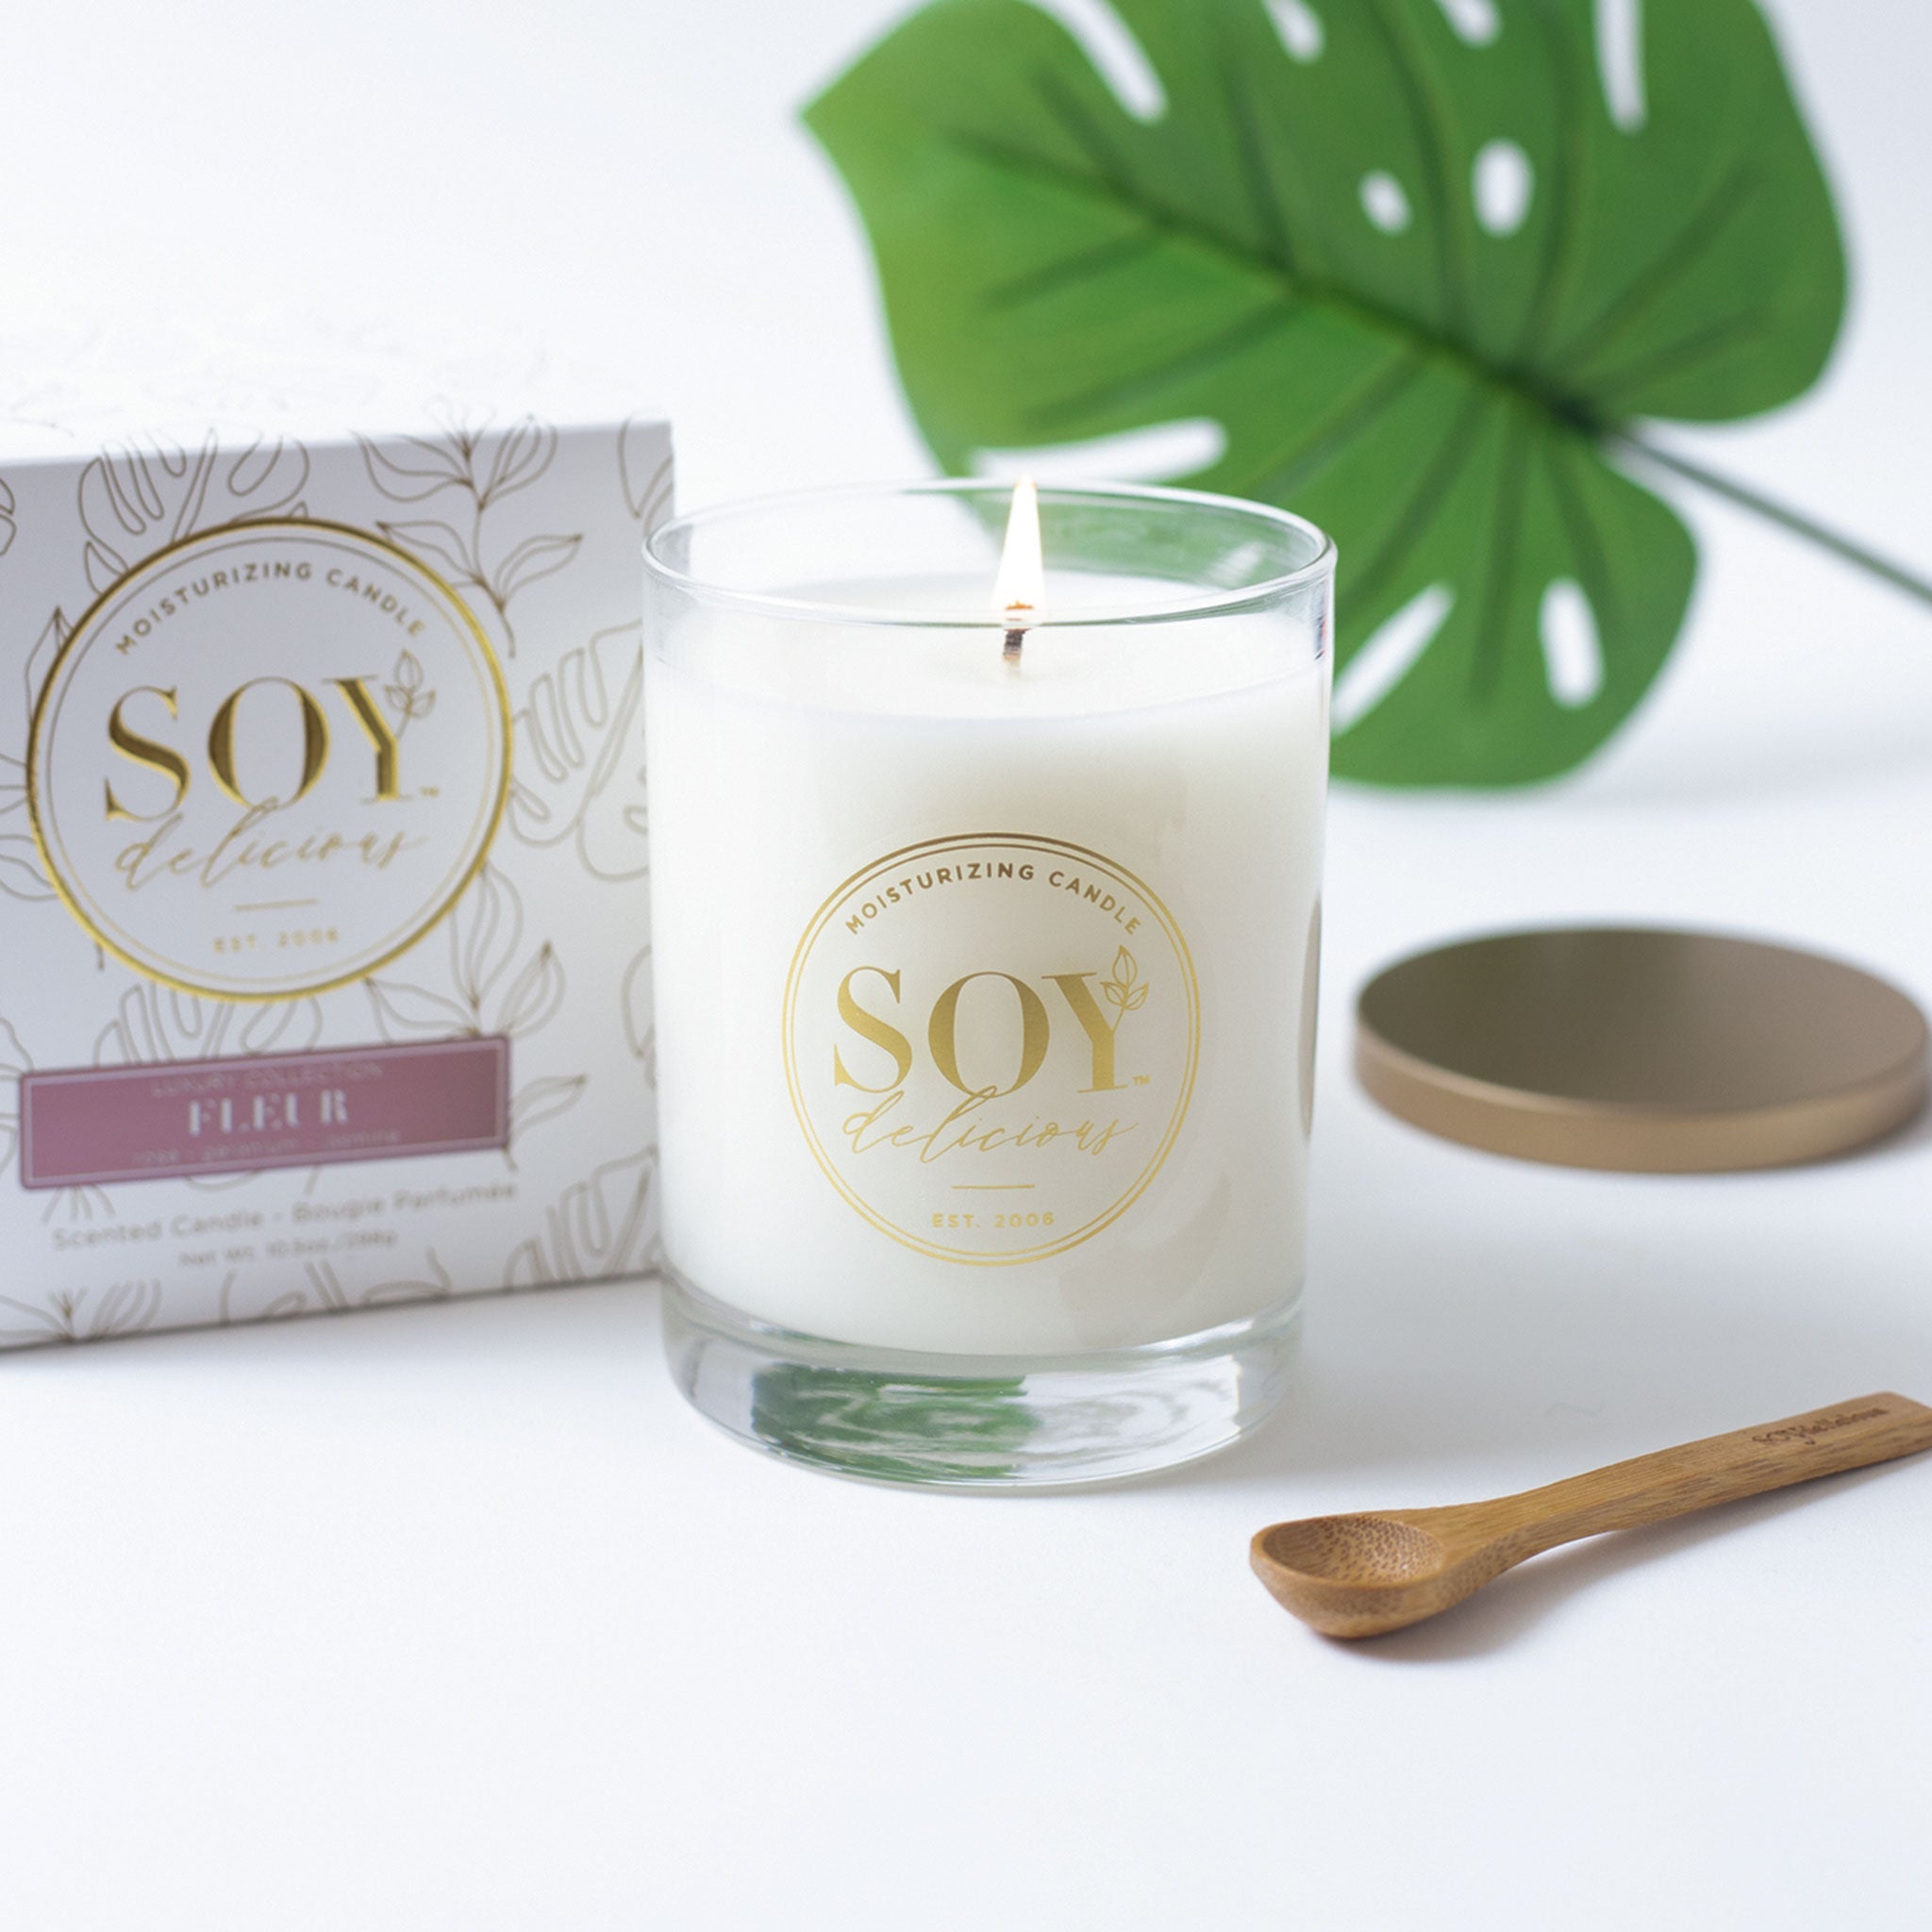 Soy Delicious Candle